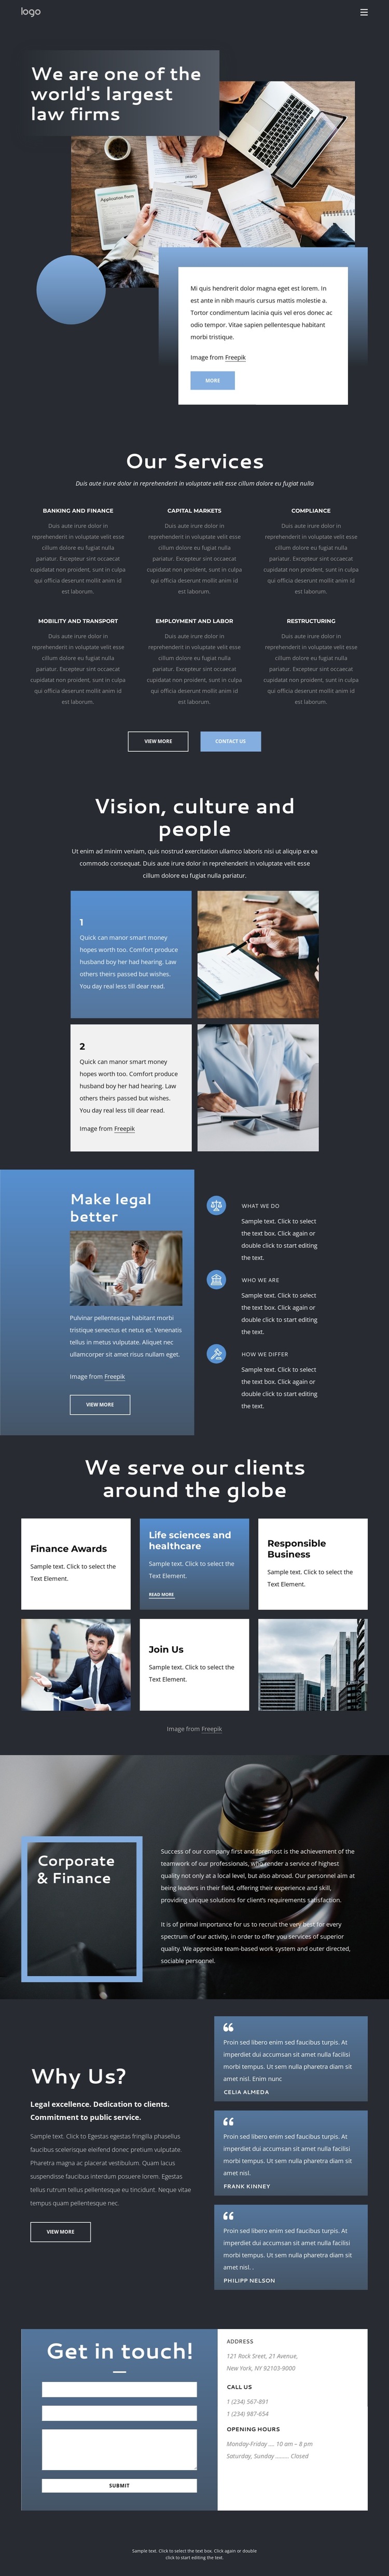 We are an elite law firm HTML5 Template